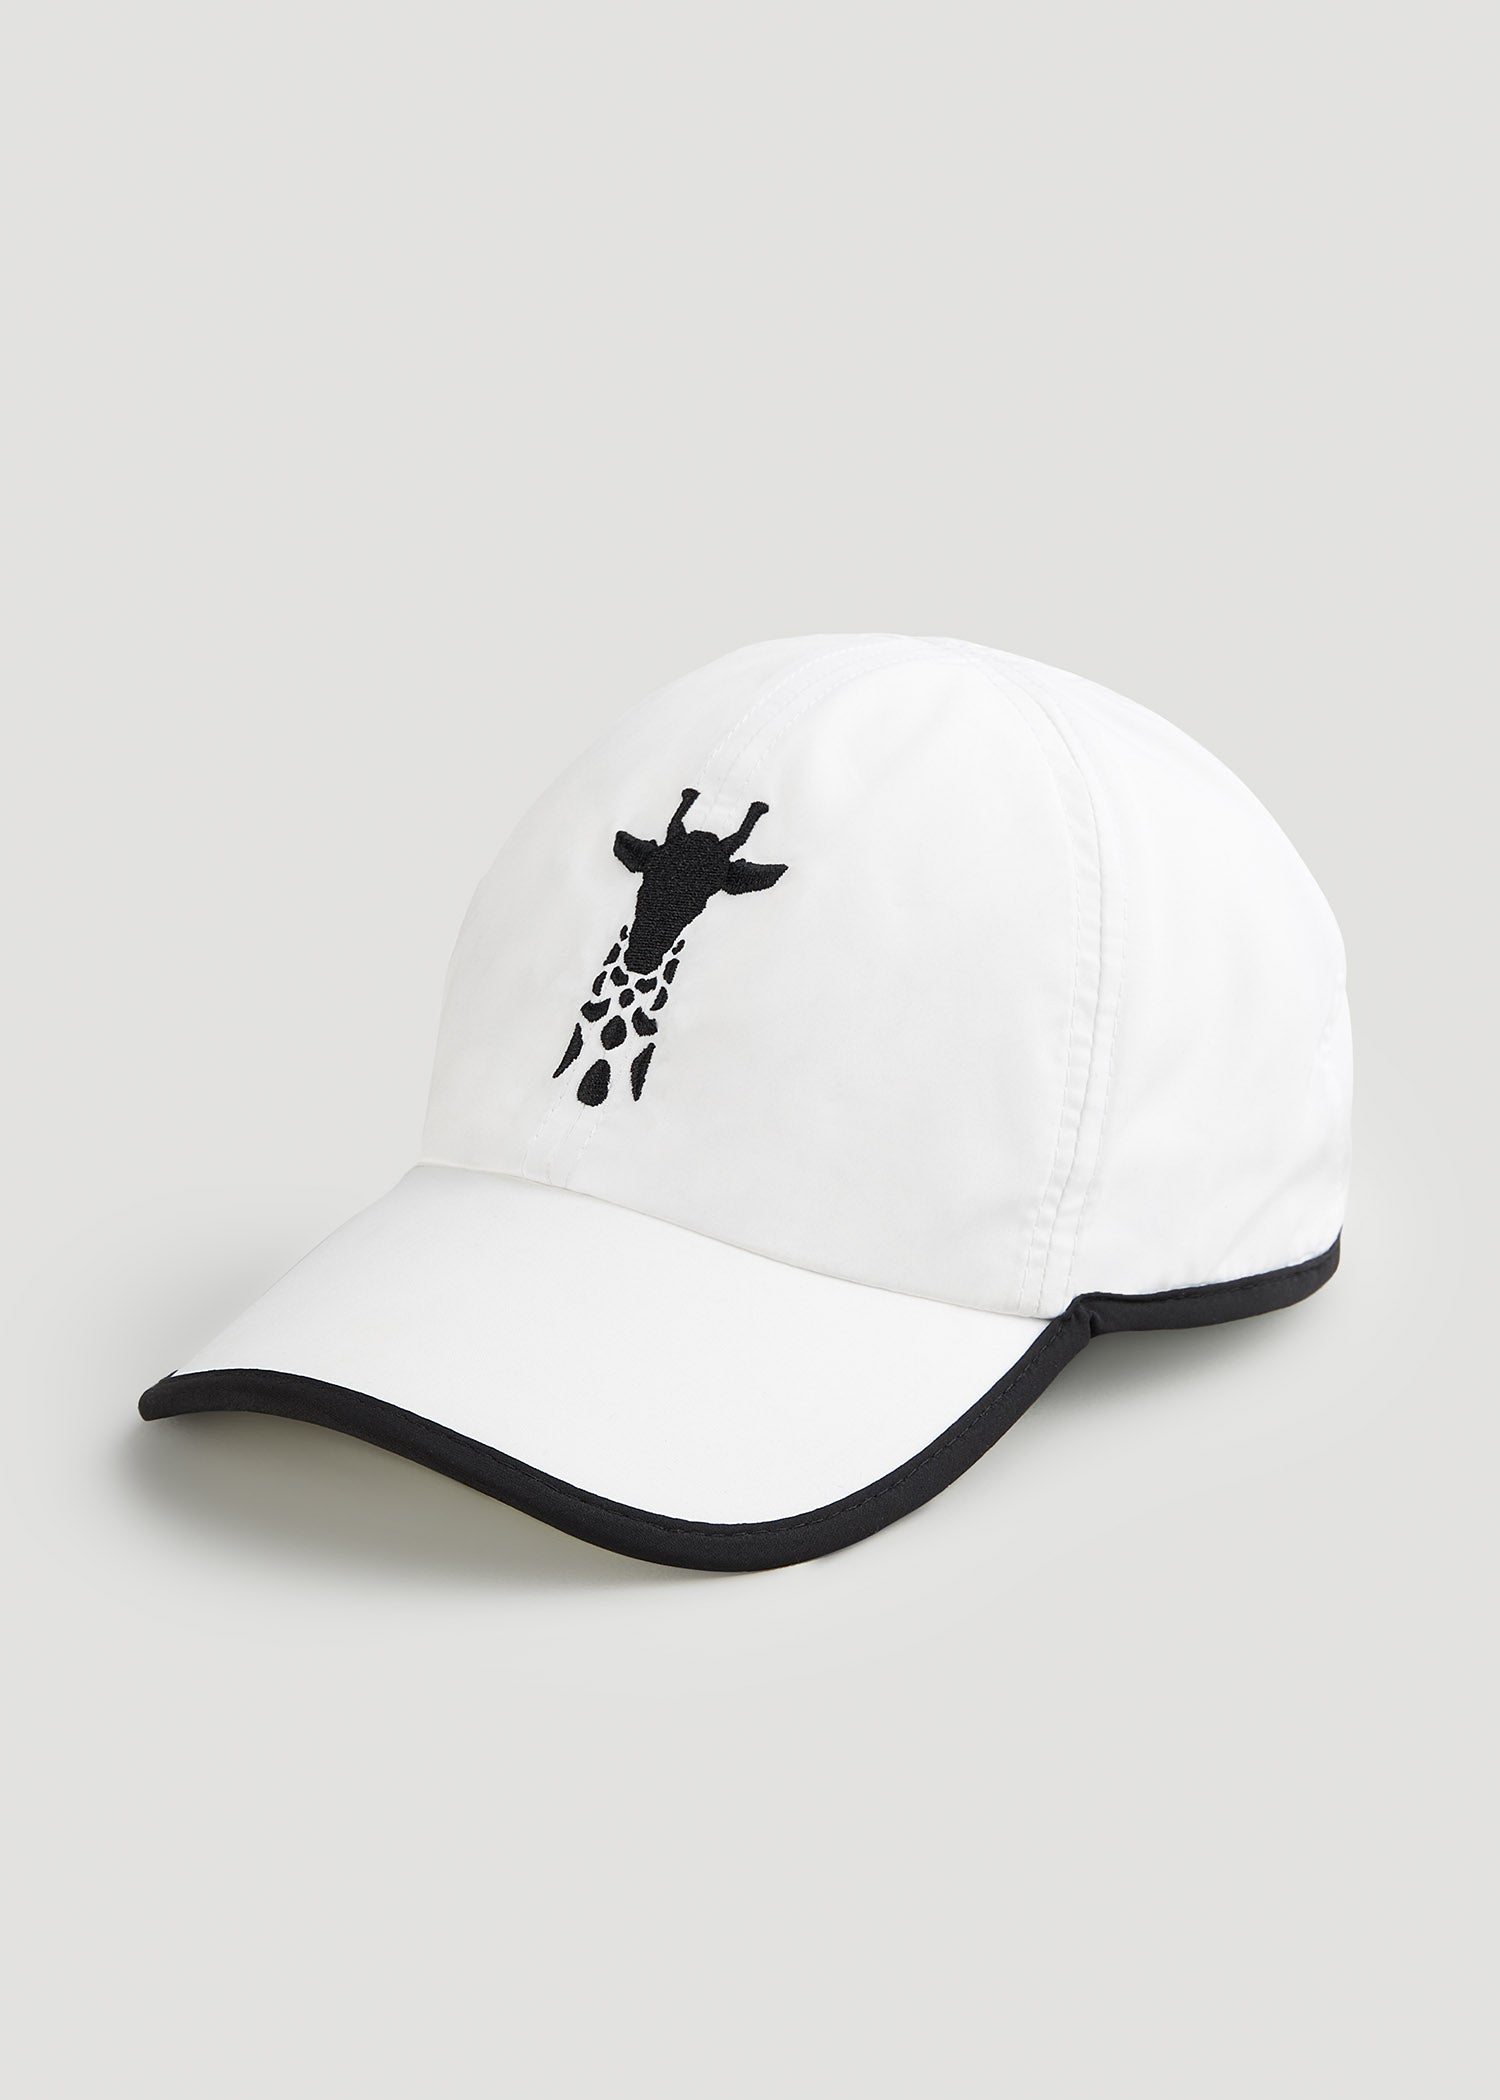 Tall Lightweight Performance Hat in Bright White